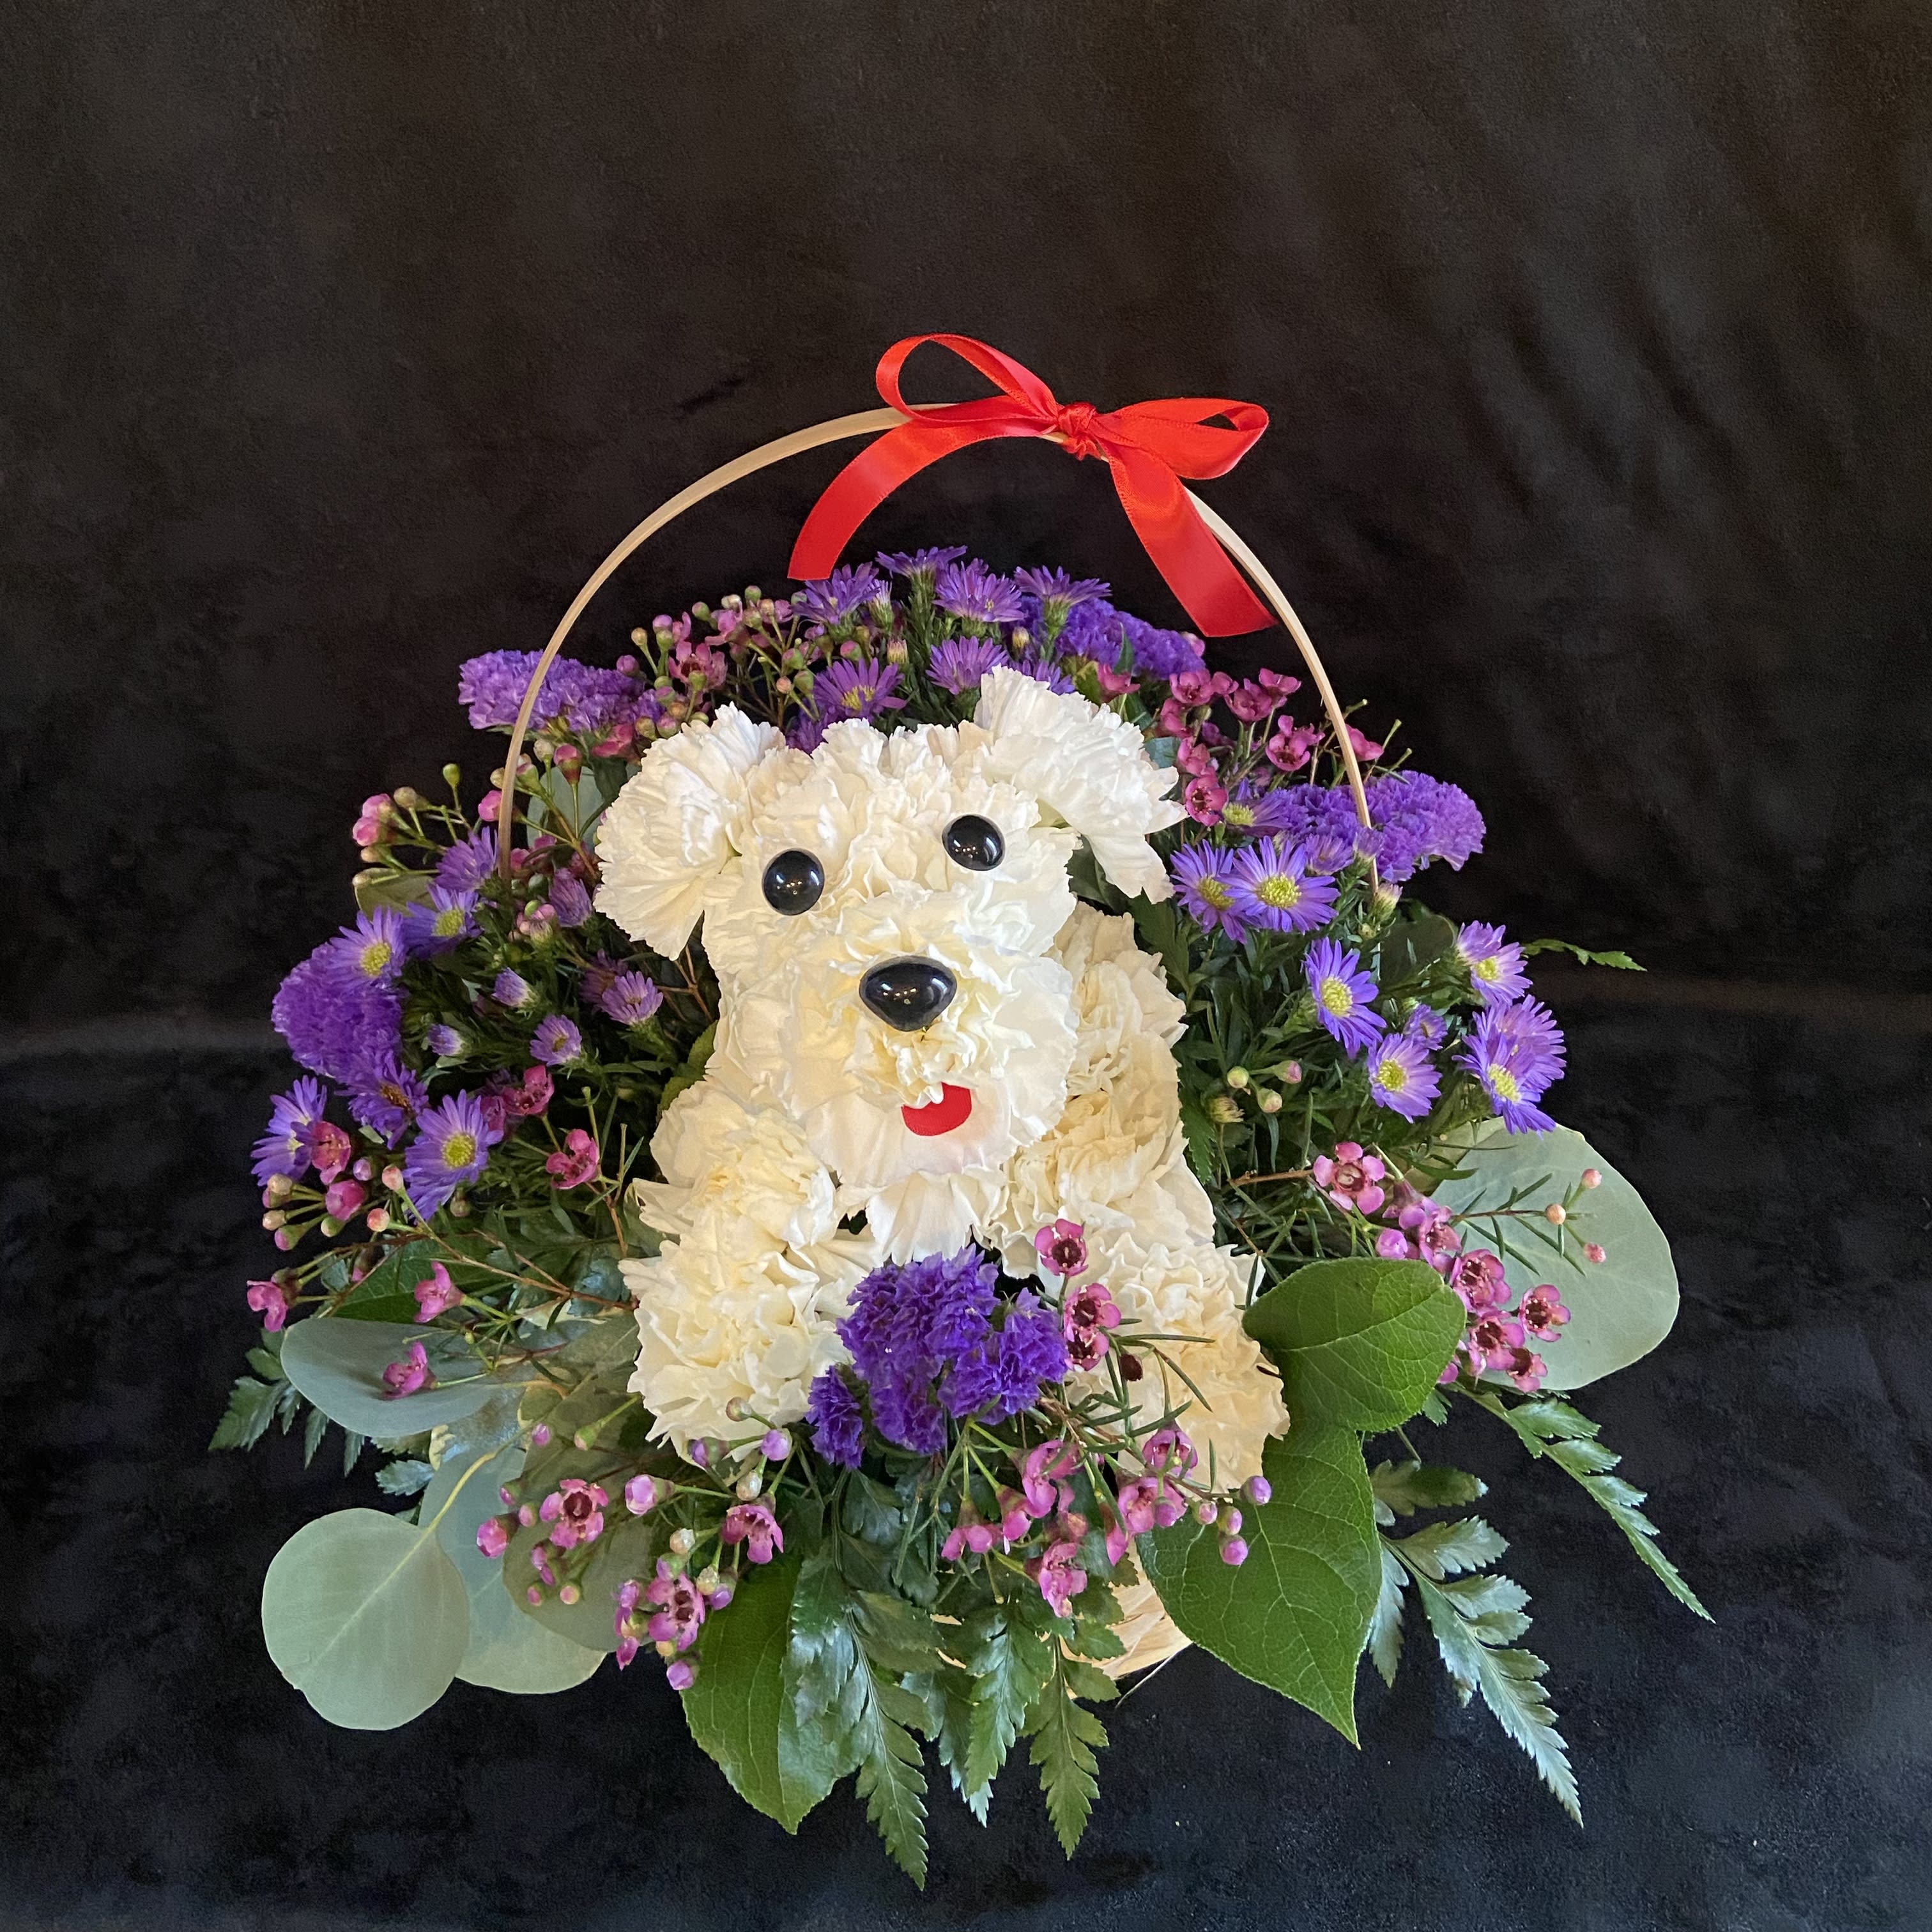 Puppy Love - Floral puppy surrounded by blooms in a basket.